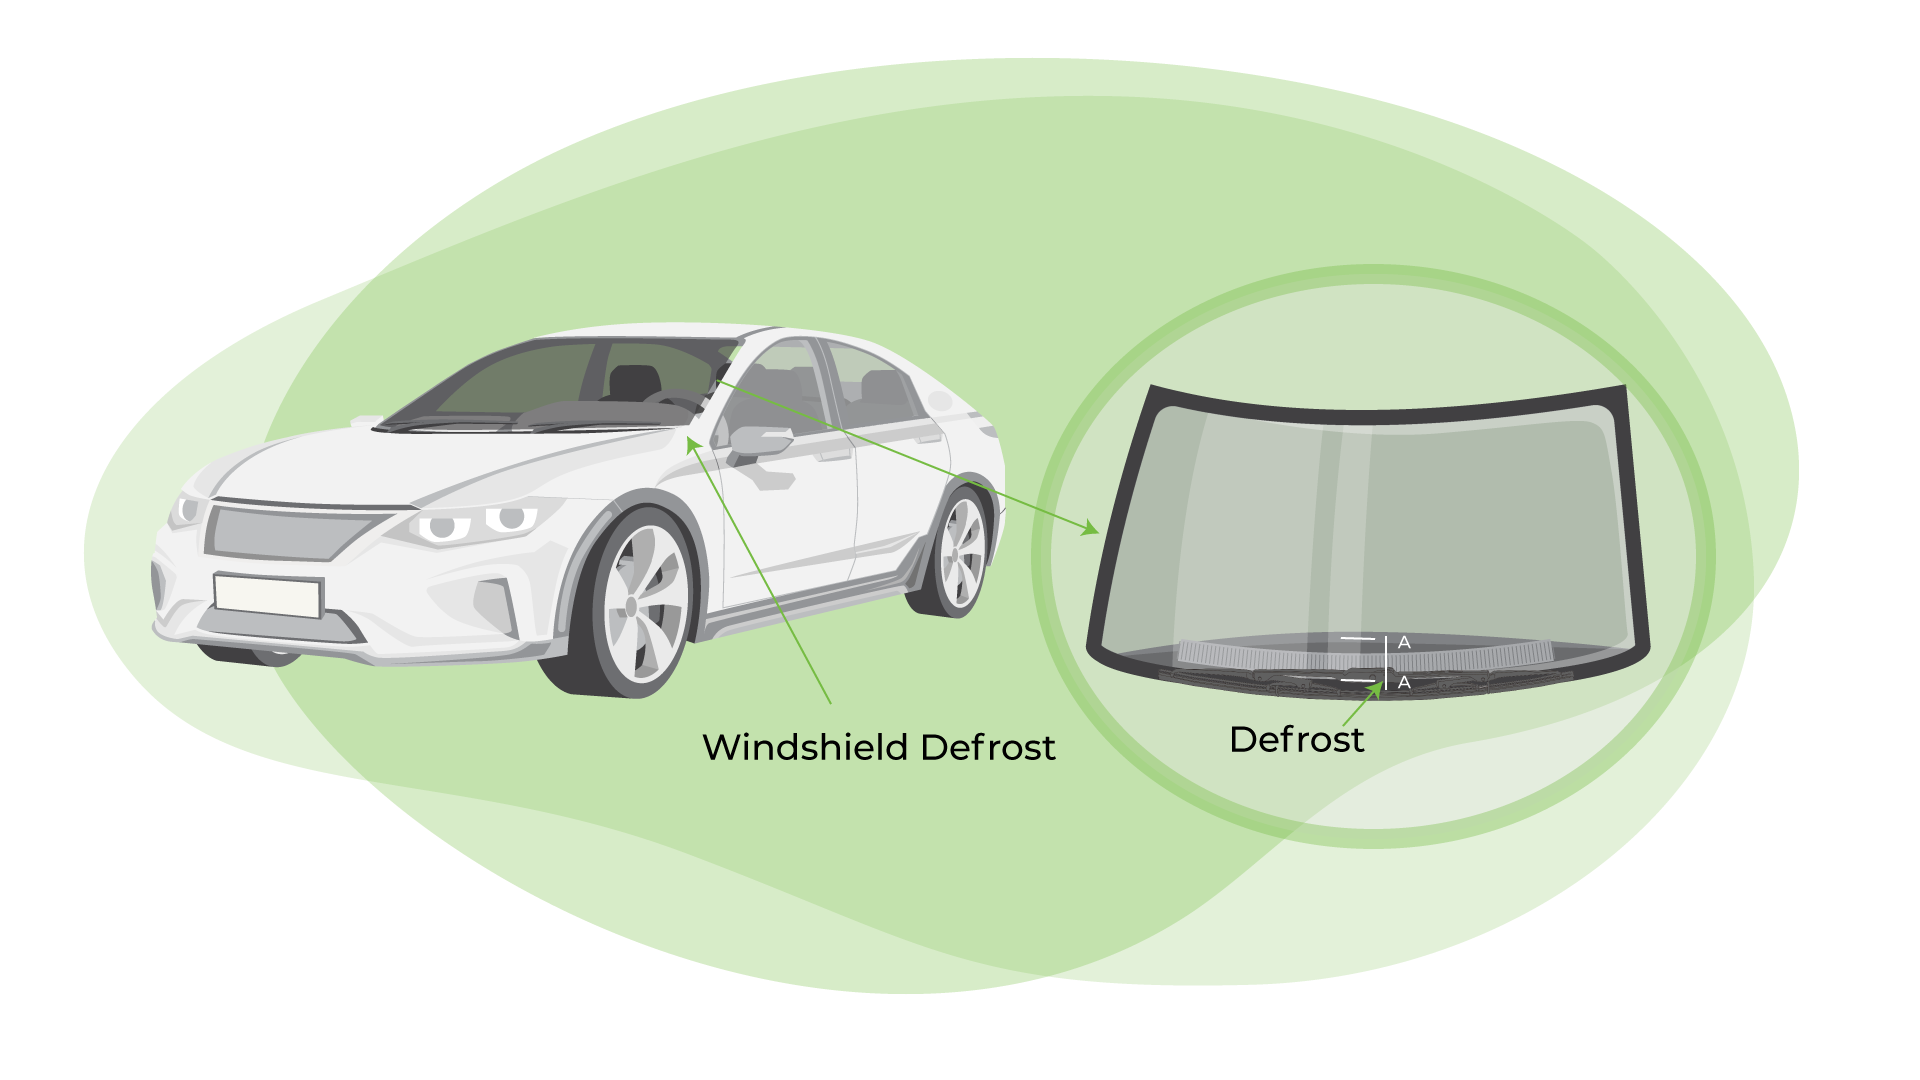 Applying the Goken Way of Product Development for Optimizing Windshield Defrost Duct Design for an Automotive OEM